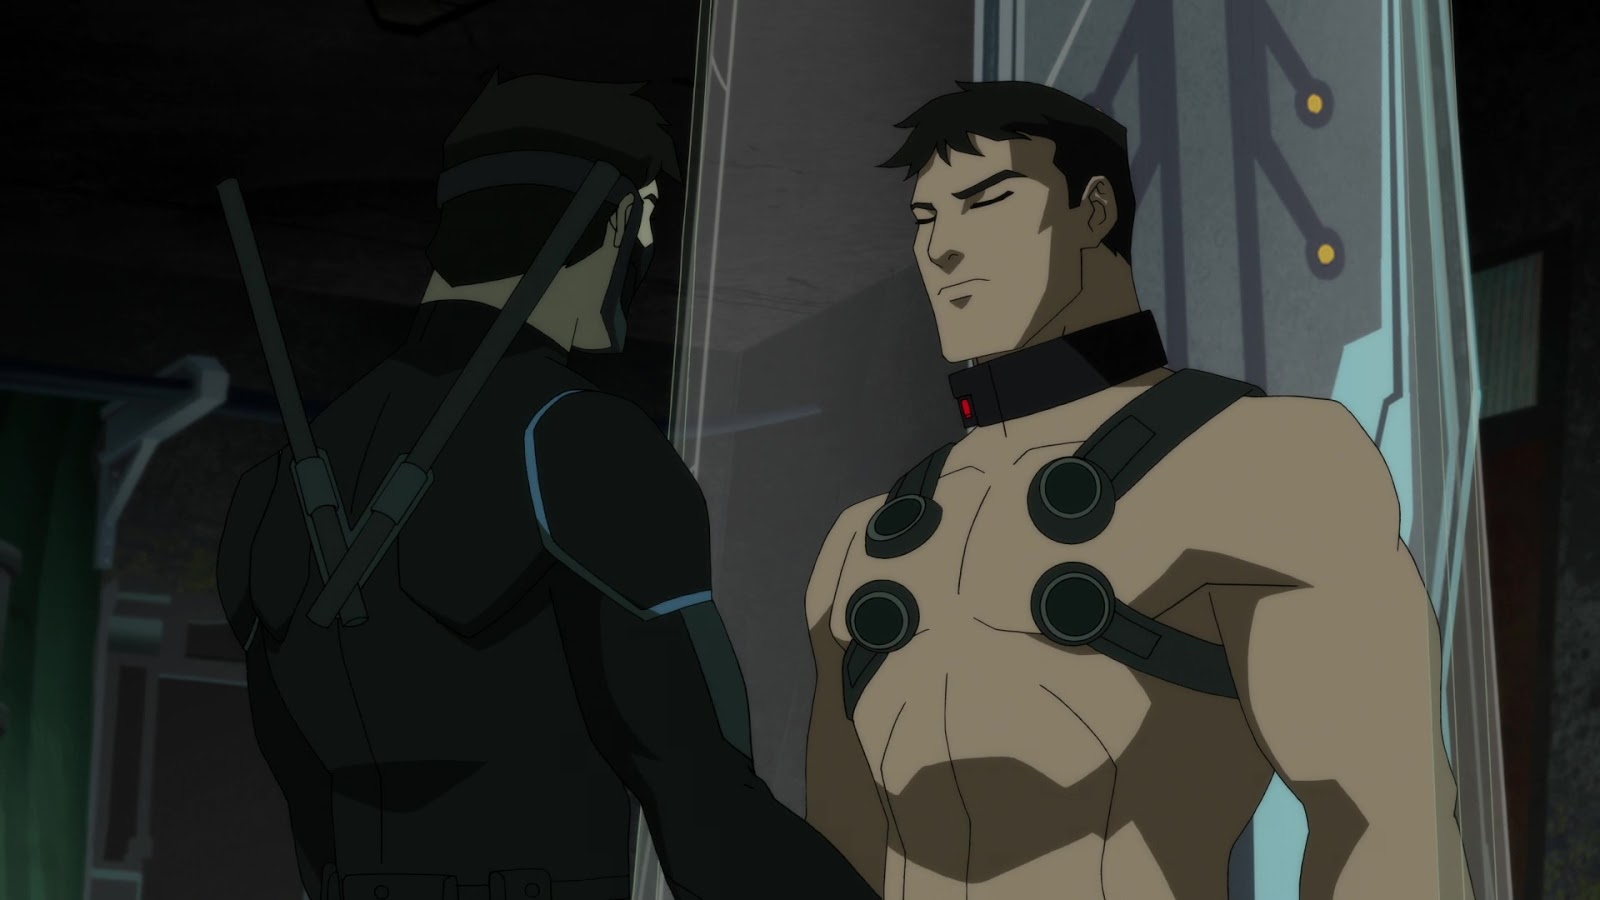 In the Young Justice: Outsiders episode "Eminent Treat" we rejoin...